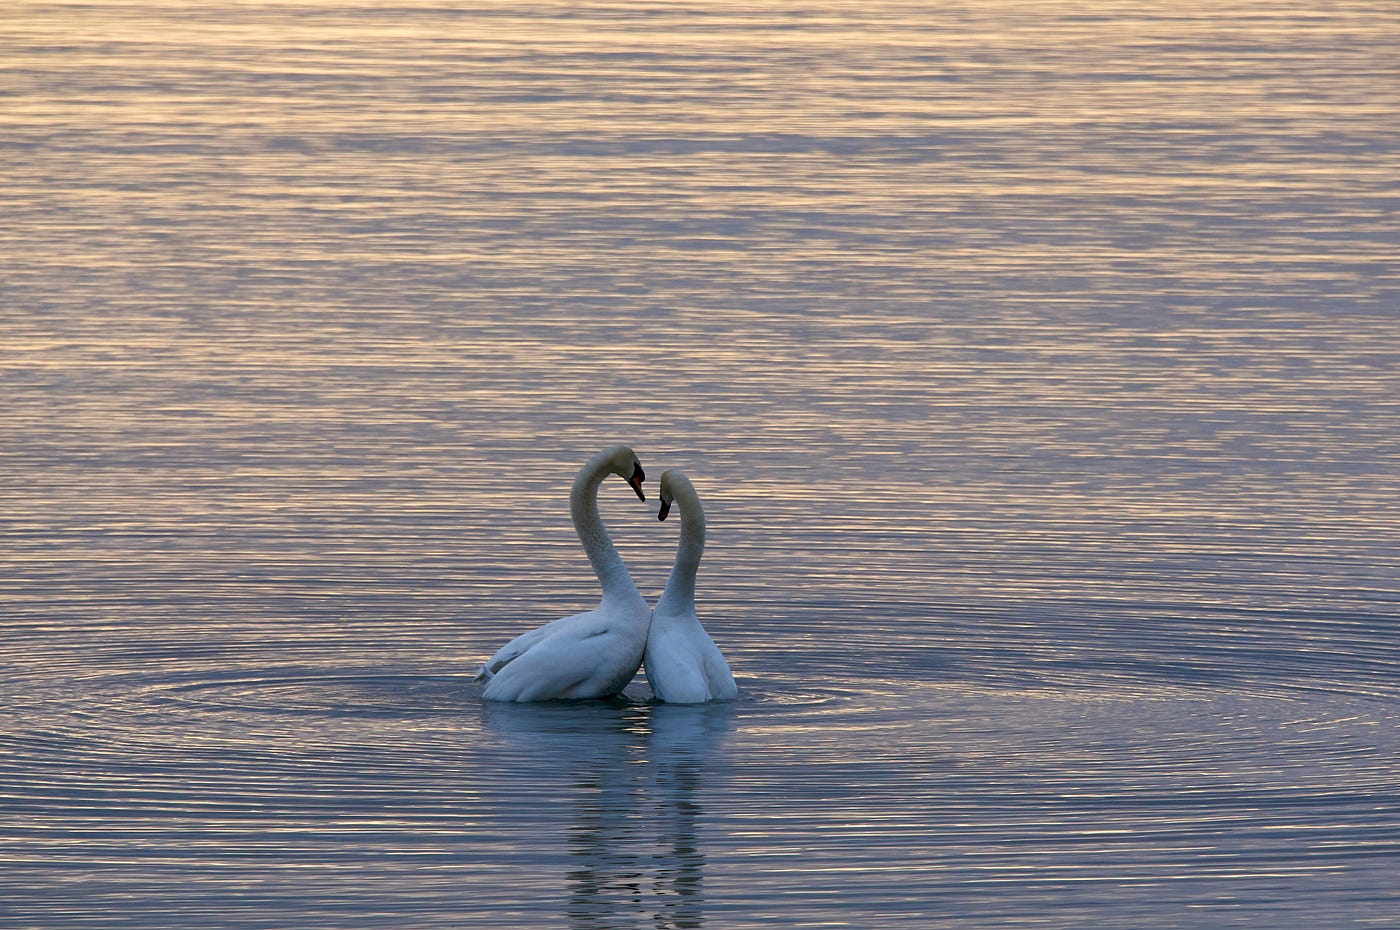 A pair of swans canoodling on a lake illuminated by the sunset.